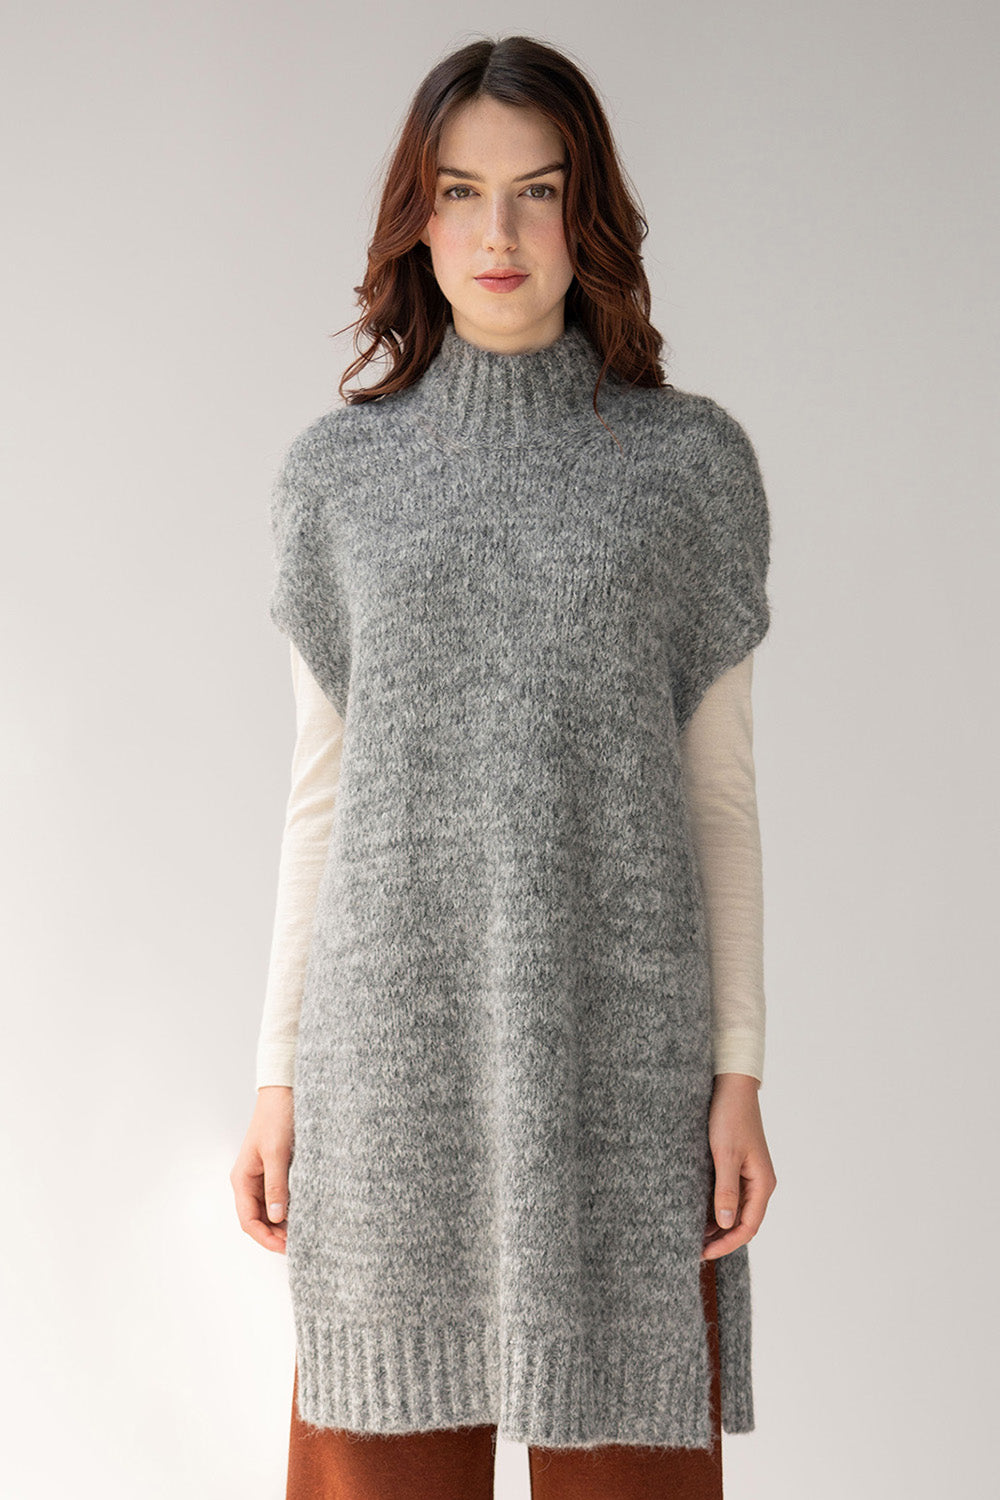 Grey mock neck tunic vest made with soft alpaca blended yarn knitted in two contrasting colors